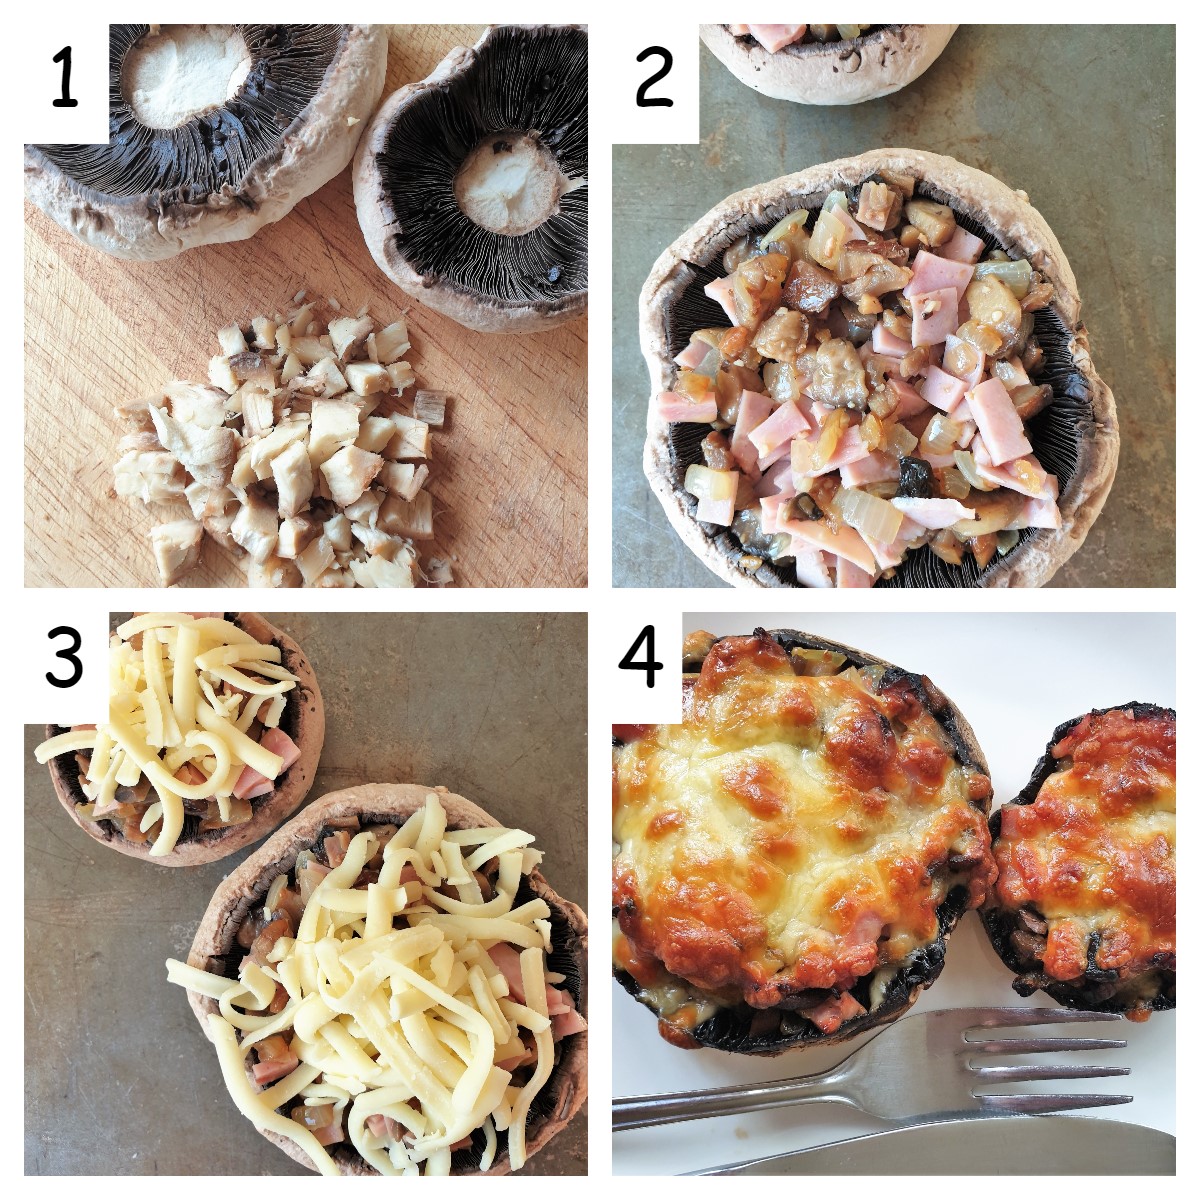 Collage of 4 images showing the steps for stuffing a mushroom.